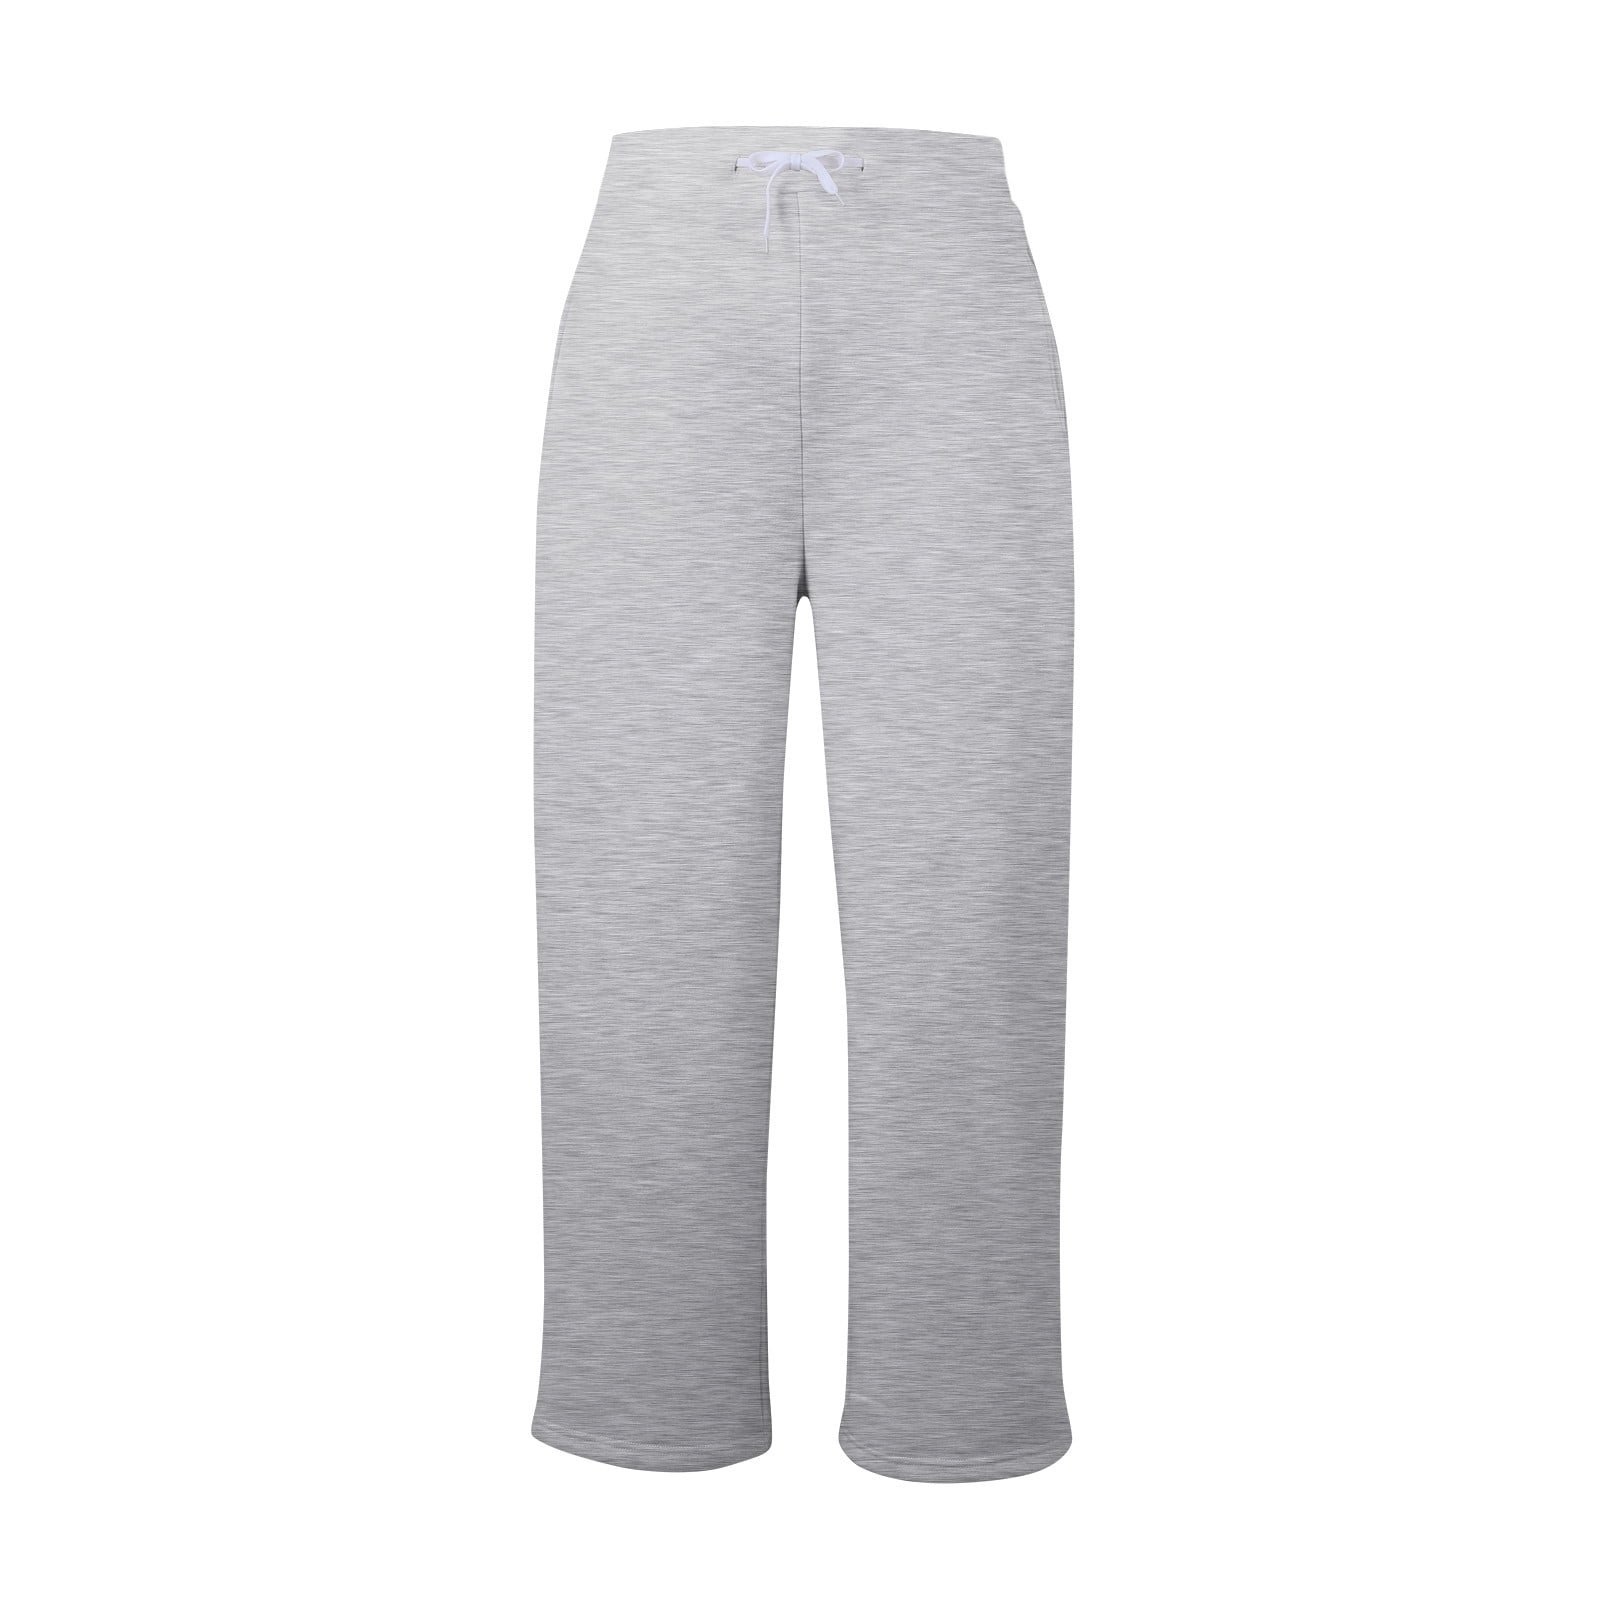 TQWQT Women's Wide Leg Sweatpants Casual Trendy Trending Loose Fit Comfy  High Wasited Elastic Waist Jogger Winter Sweat Pants with Pockets Light  Gray XXL 